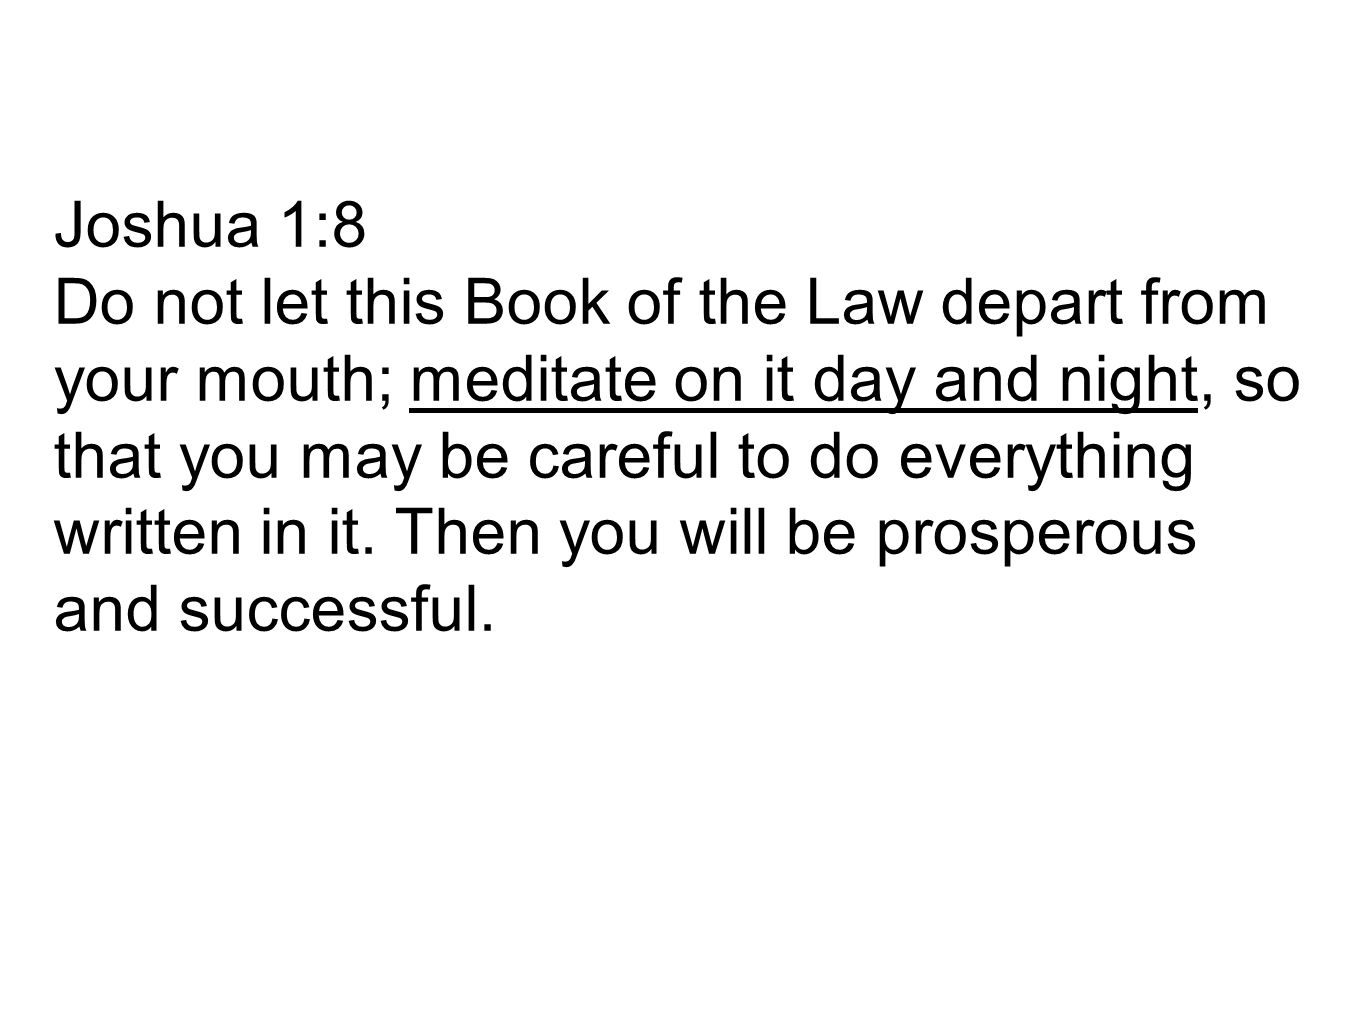 Joshua 1:8 Do not let this Book of the Law depart from your mouth; meditate on it day and night, so that you may be careful to do everything written in it.